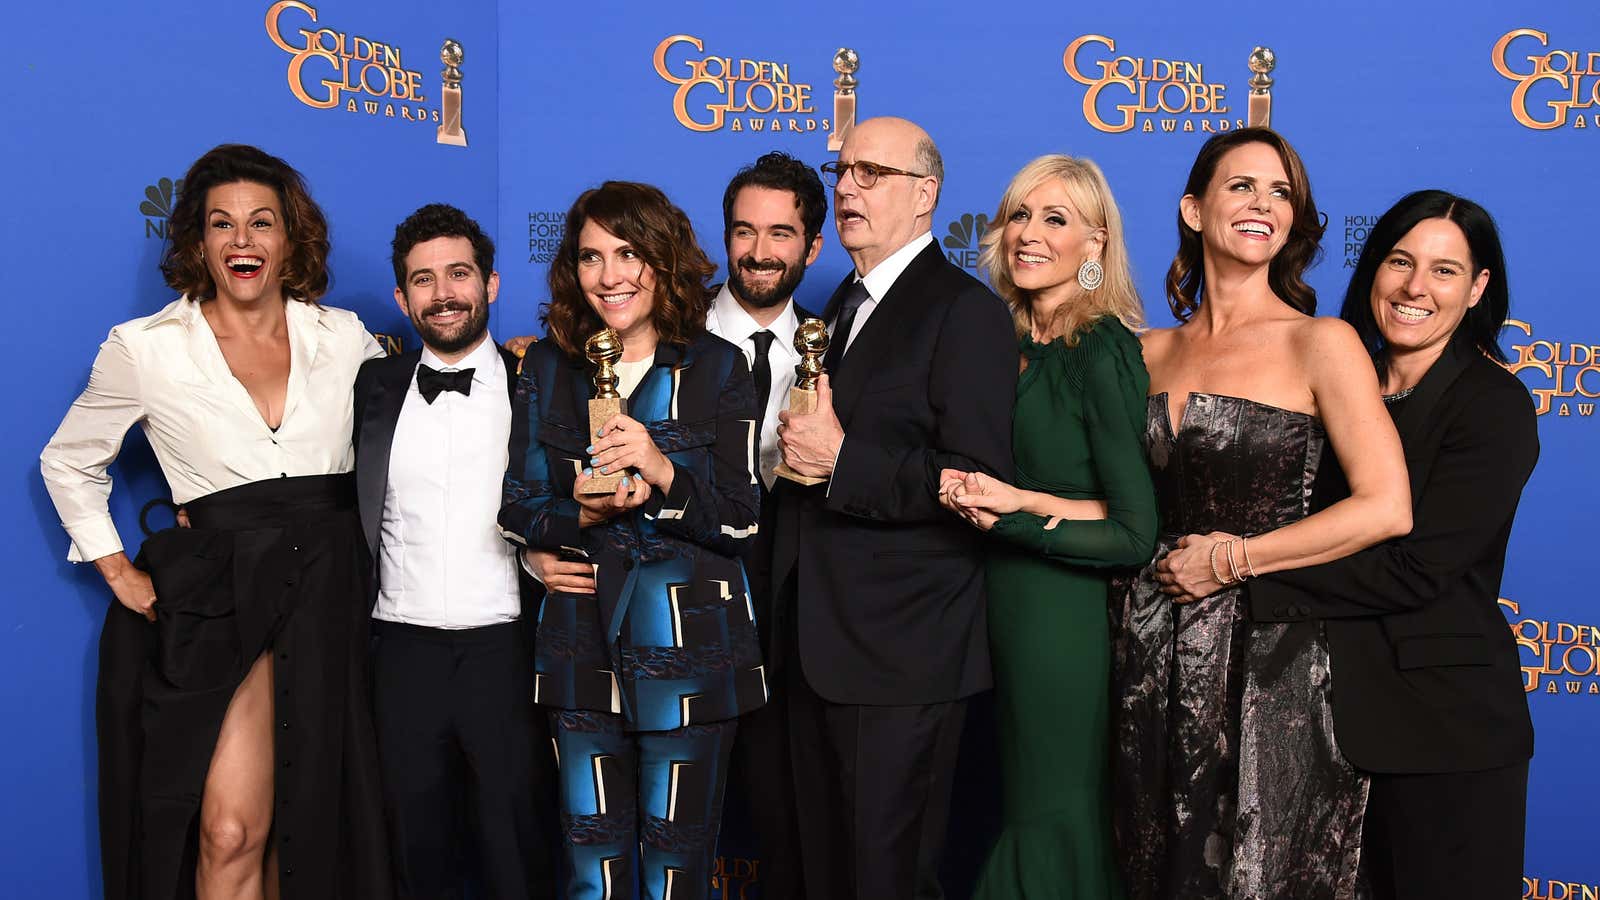 Program creator Jill Soloway and actor Jeffrey Tambor along with the cast of “Transparent” pose backstage with the Golden Globe award for Best Television Series – Comedy or Musical.